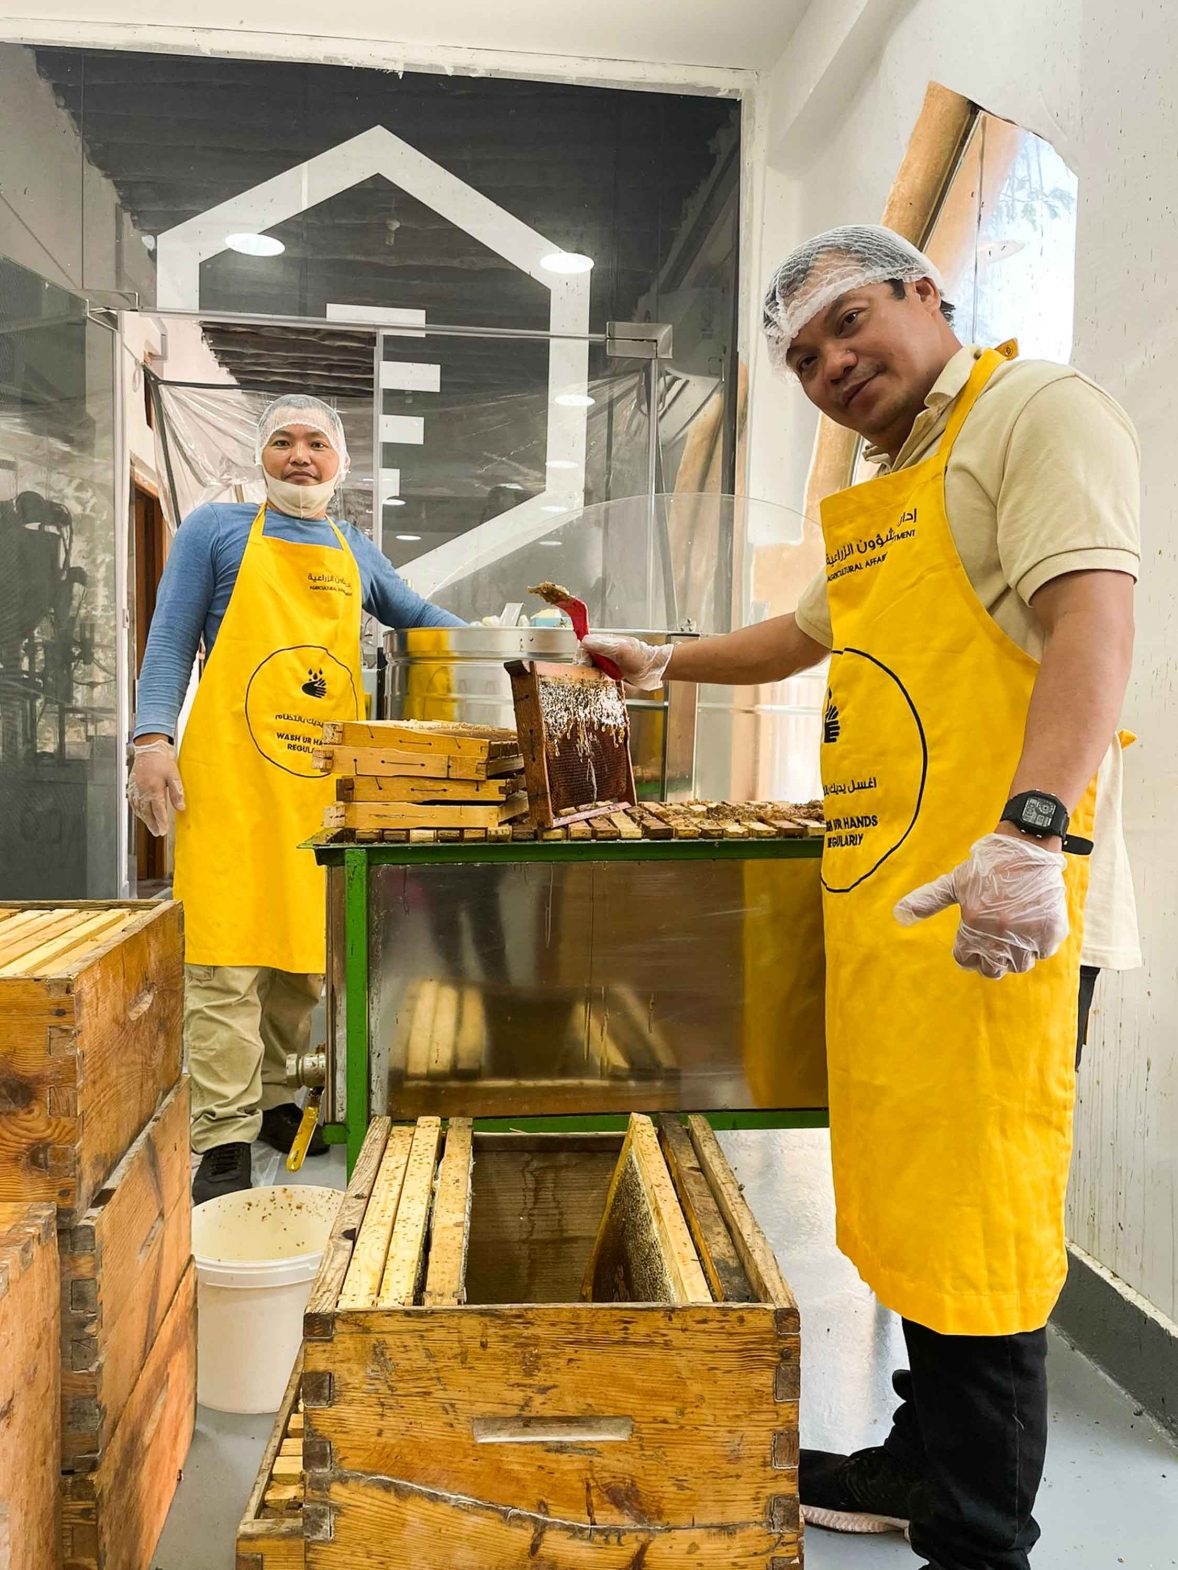 Two men in yellow aprons work to extract honey.